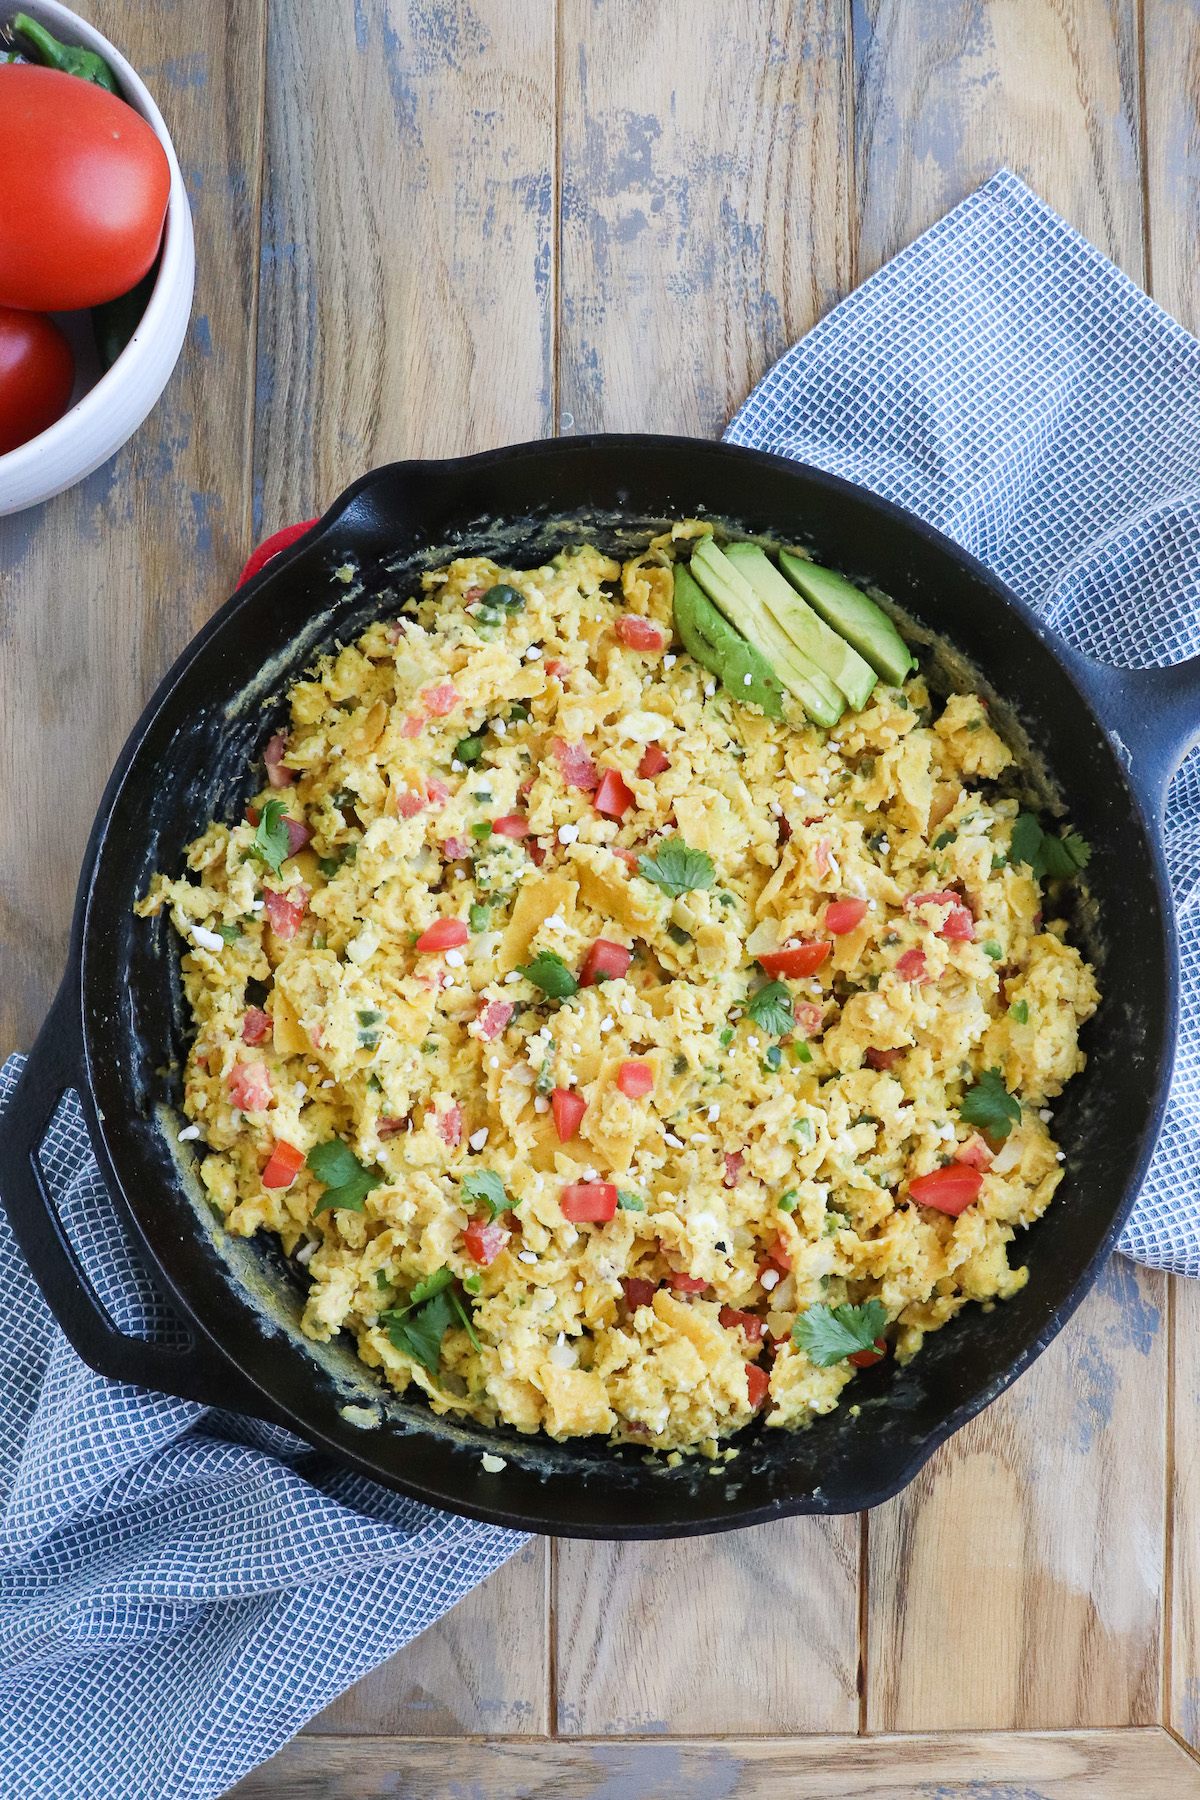 cast iron skillet of eggs scrambled with corn tortillas, tomatoes, and peppers